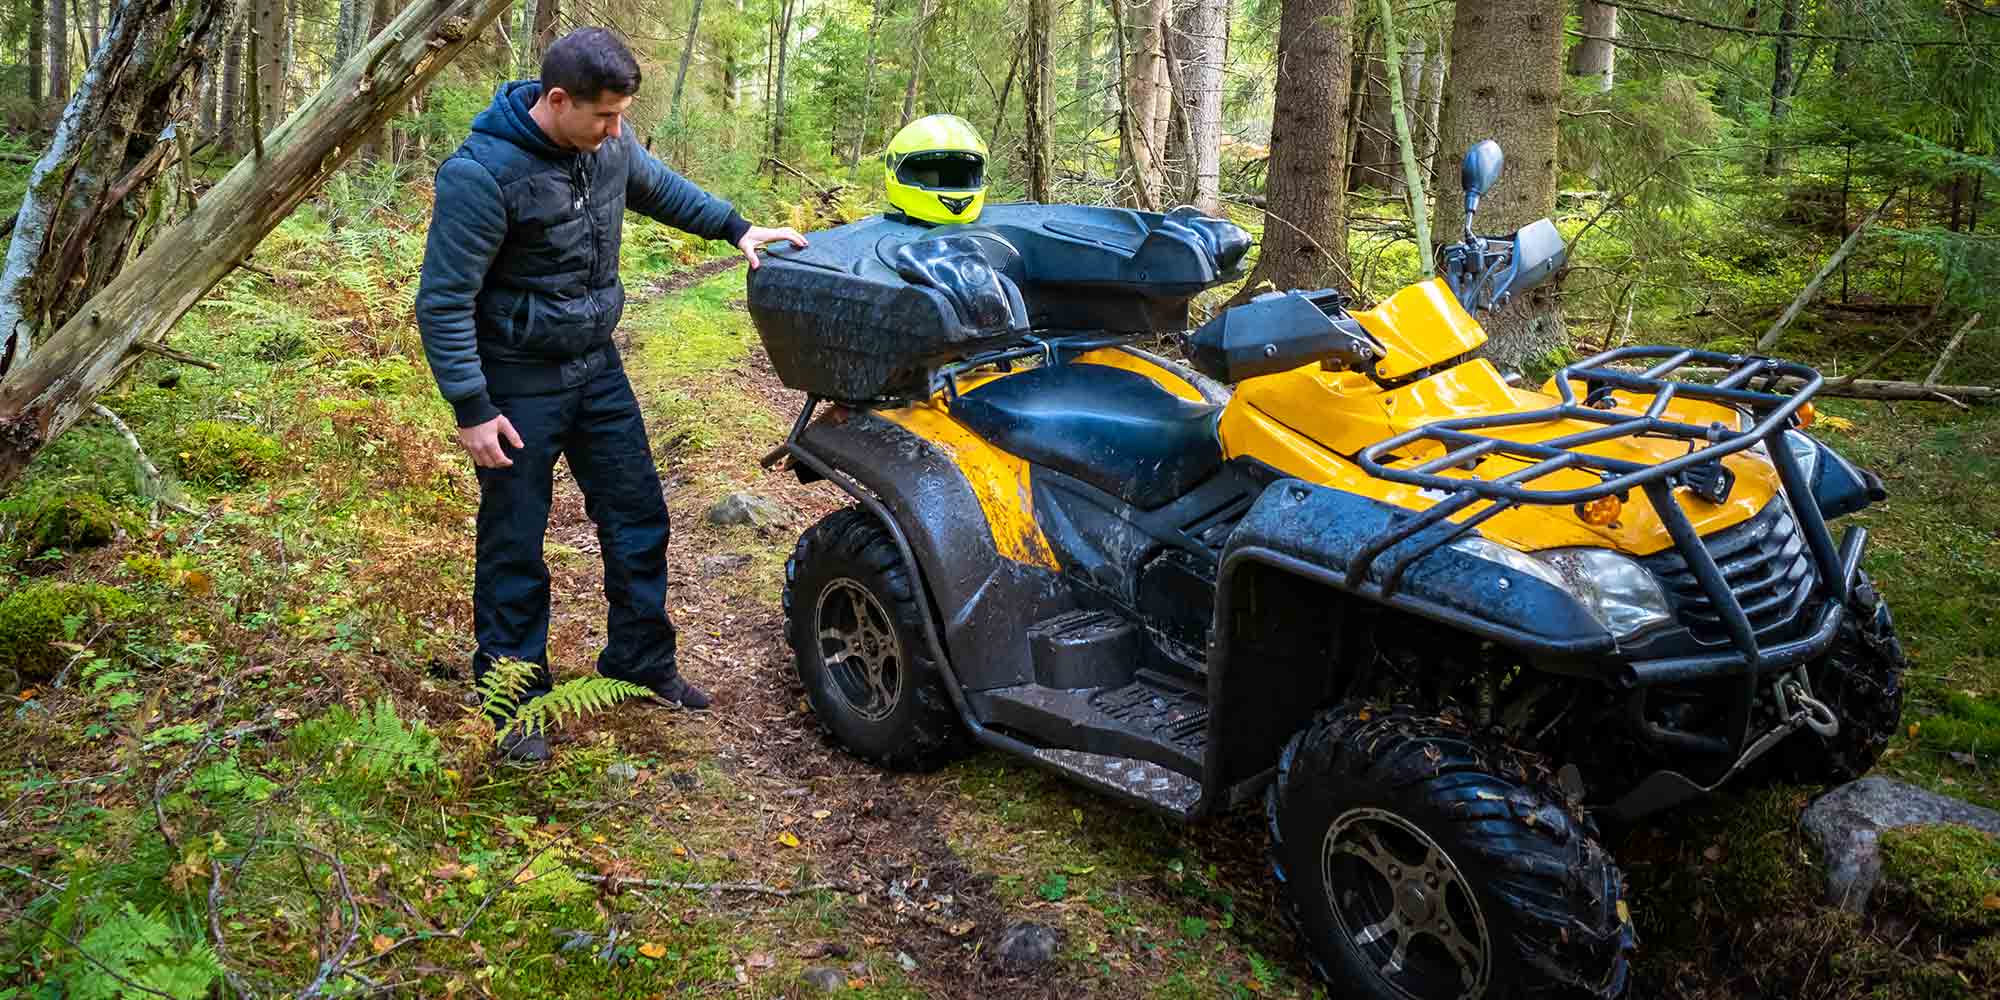 ATV protective gear and pre-ride inspection